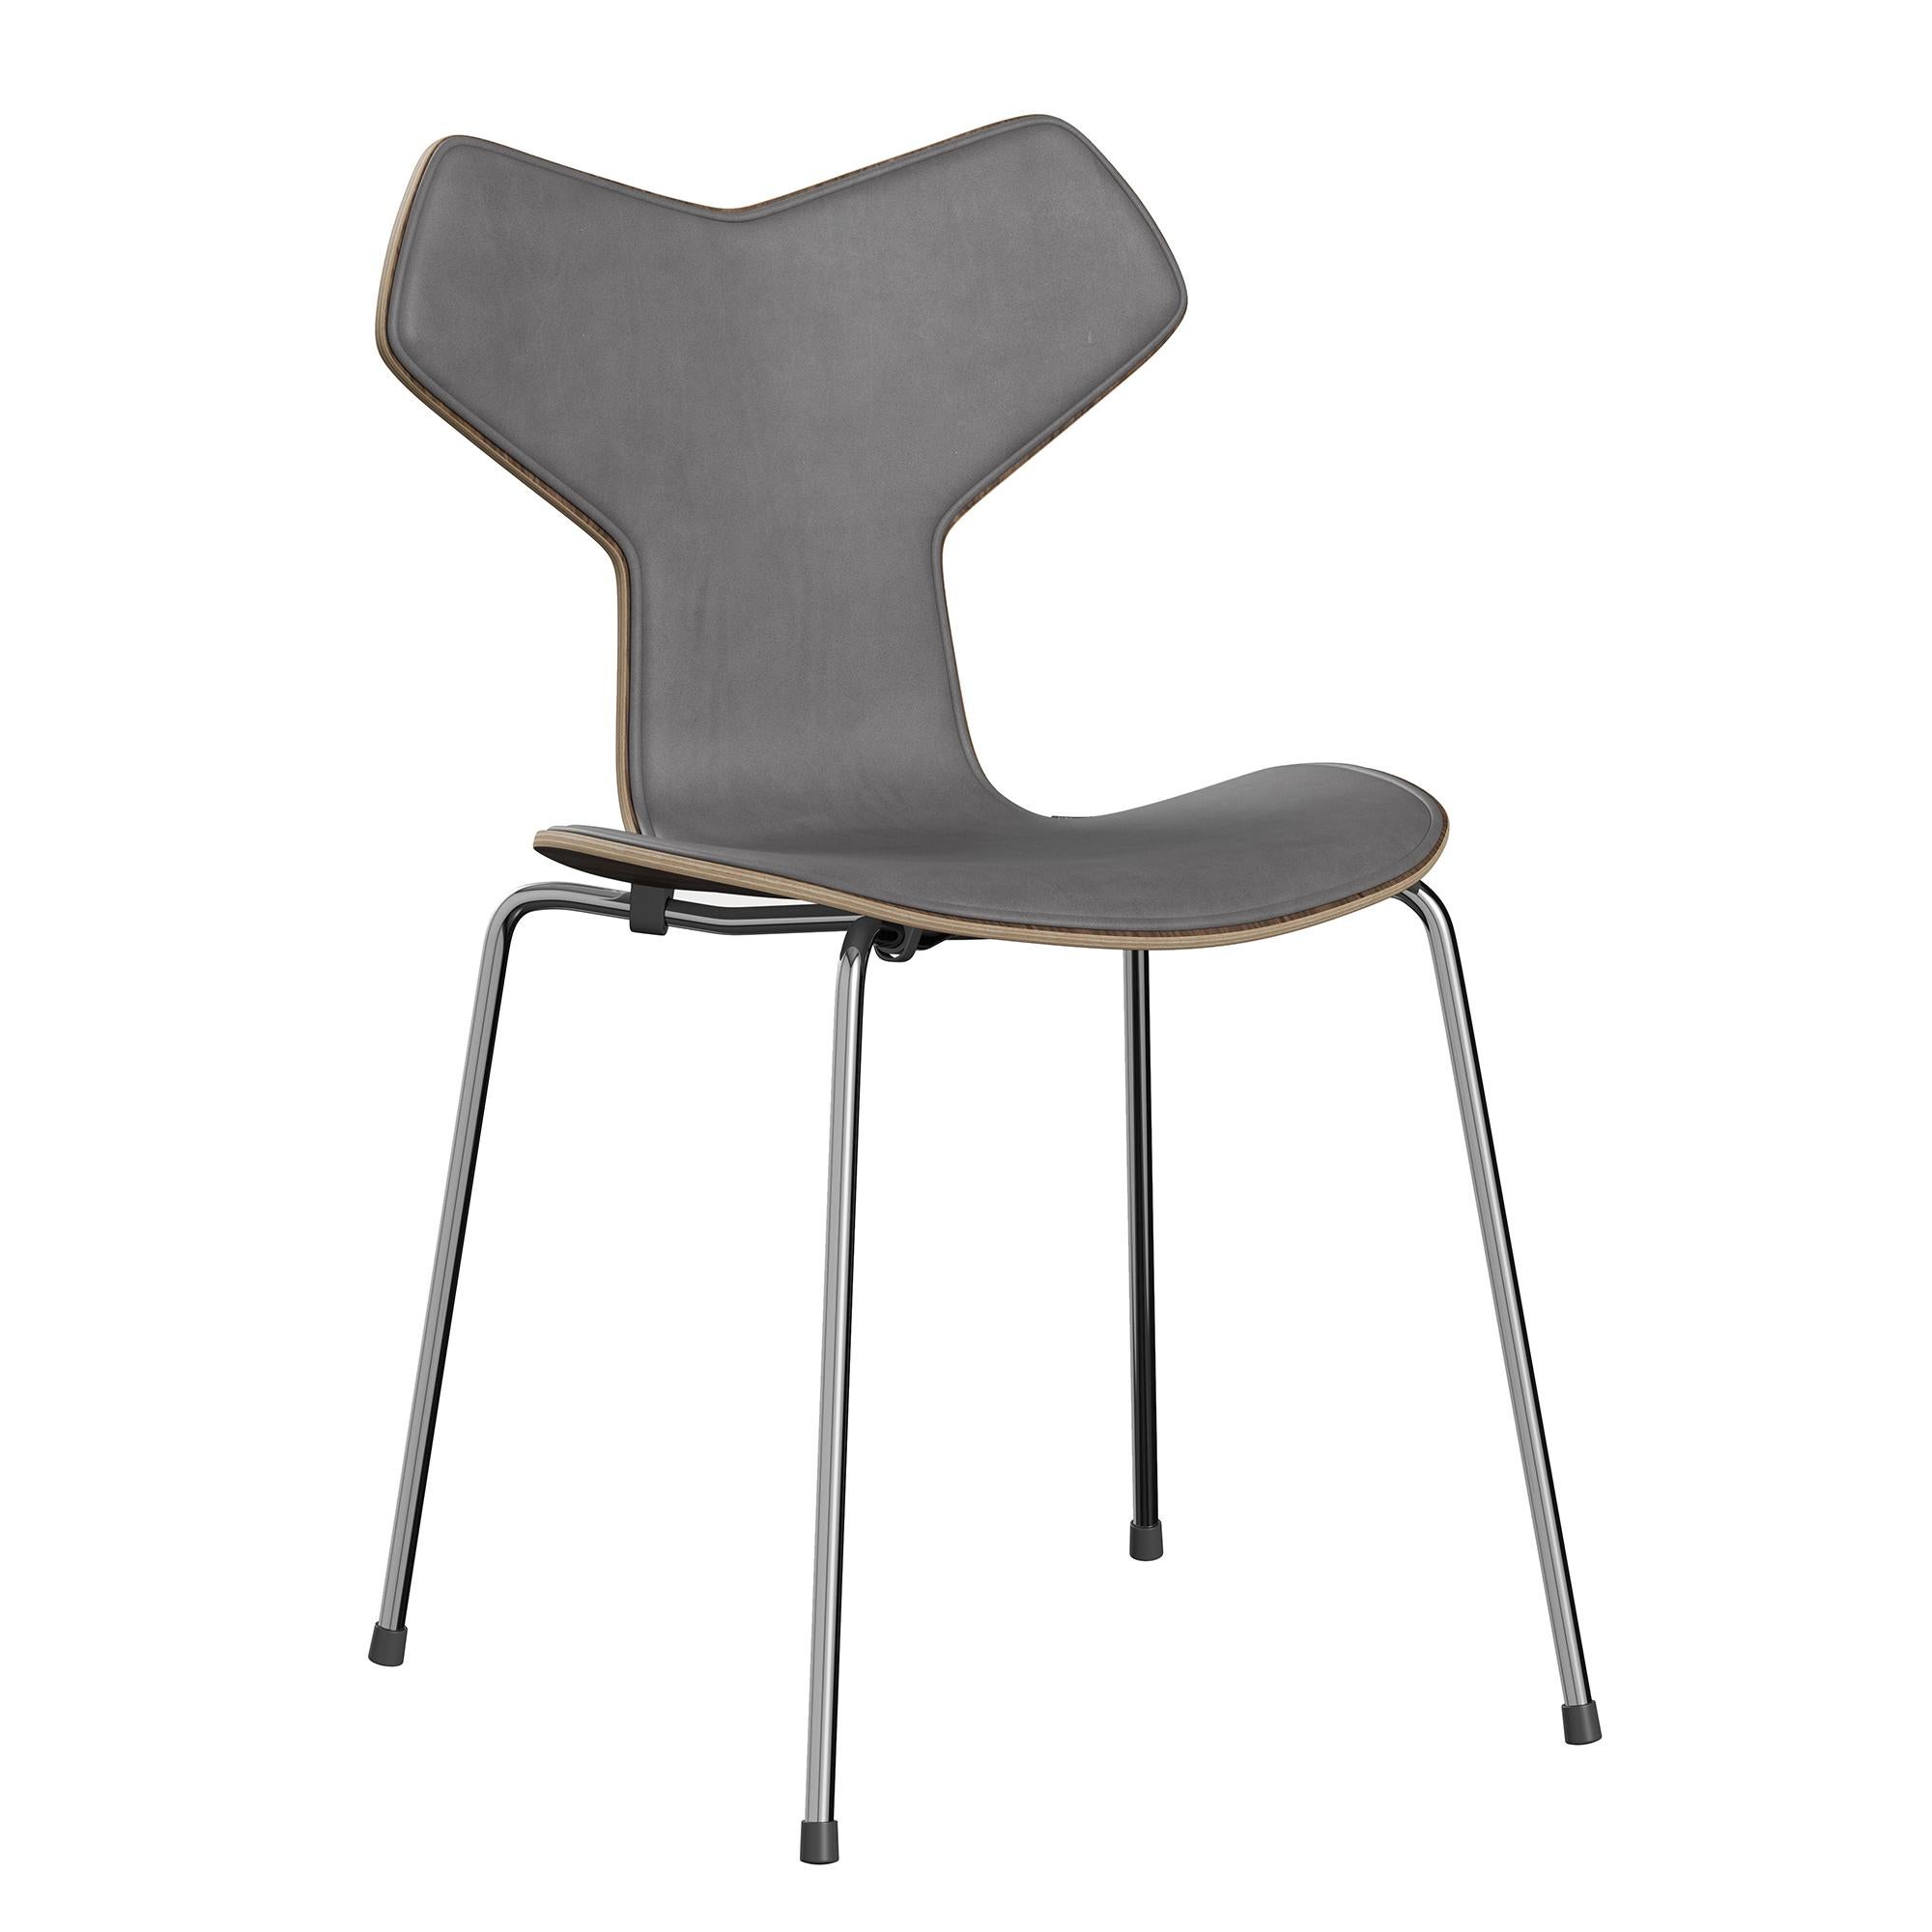 Arne Jacobsen 'Grand Prix' Chair for Fritz Hansen in Partial Leather Upholstery For Sale 3